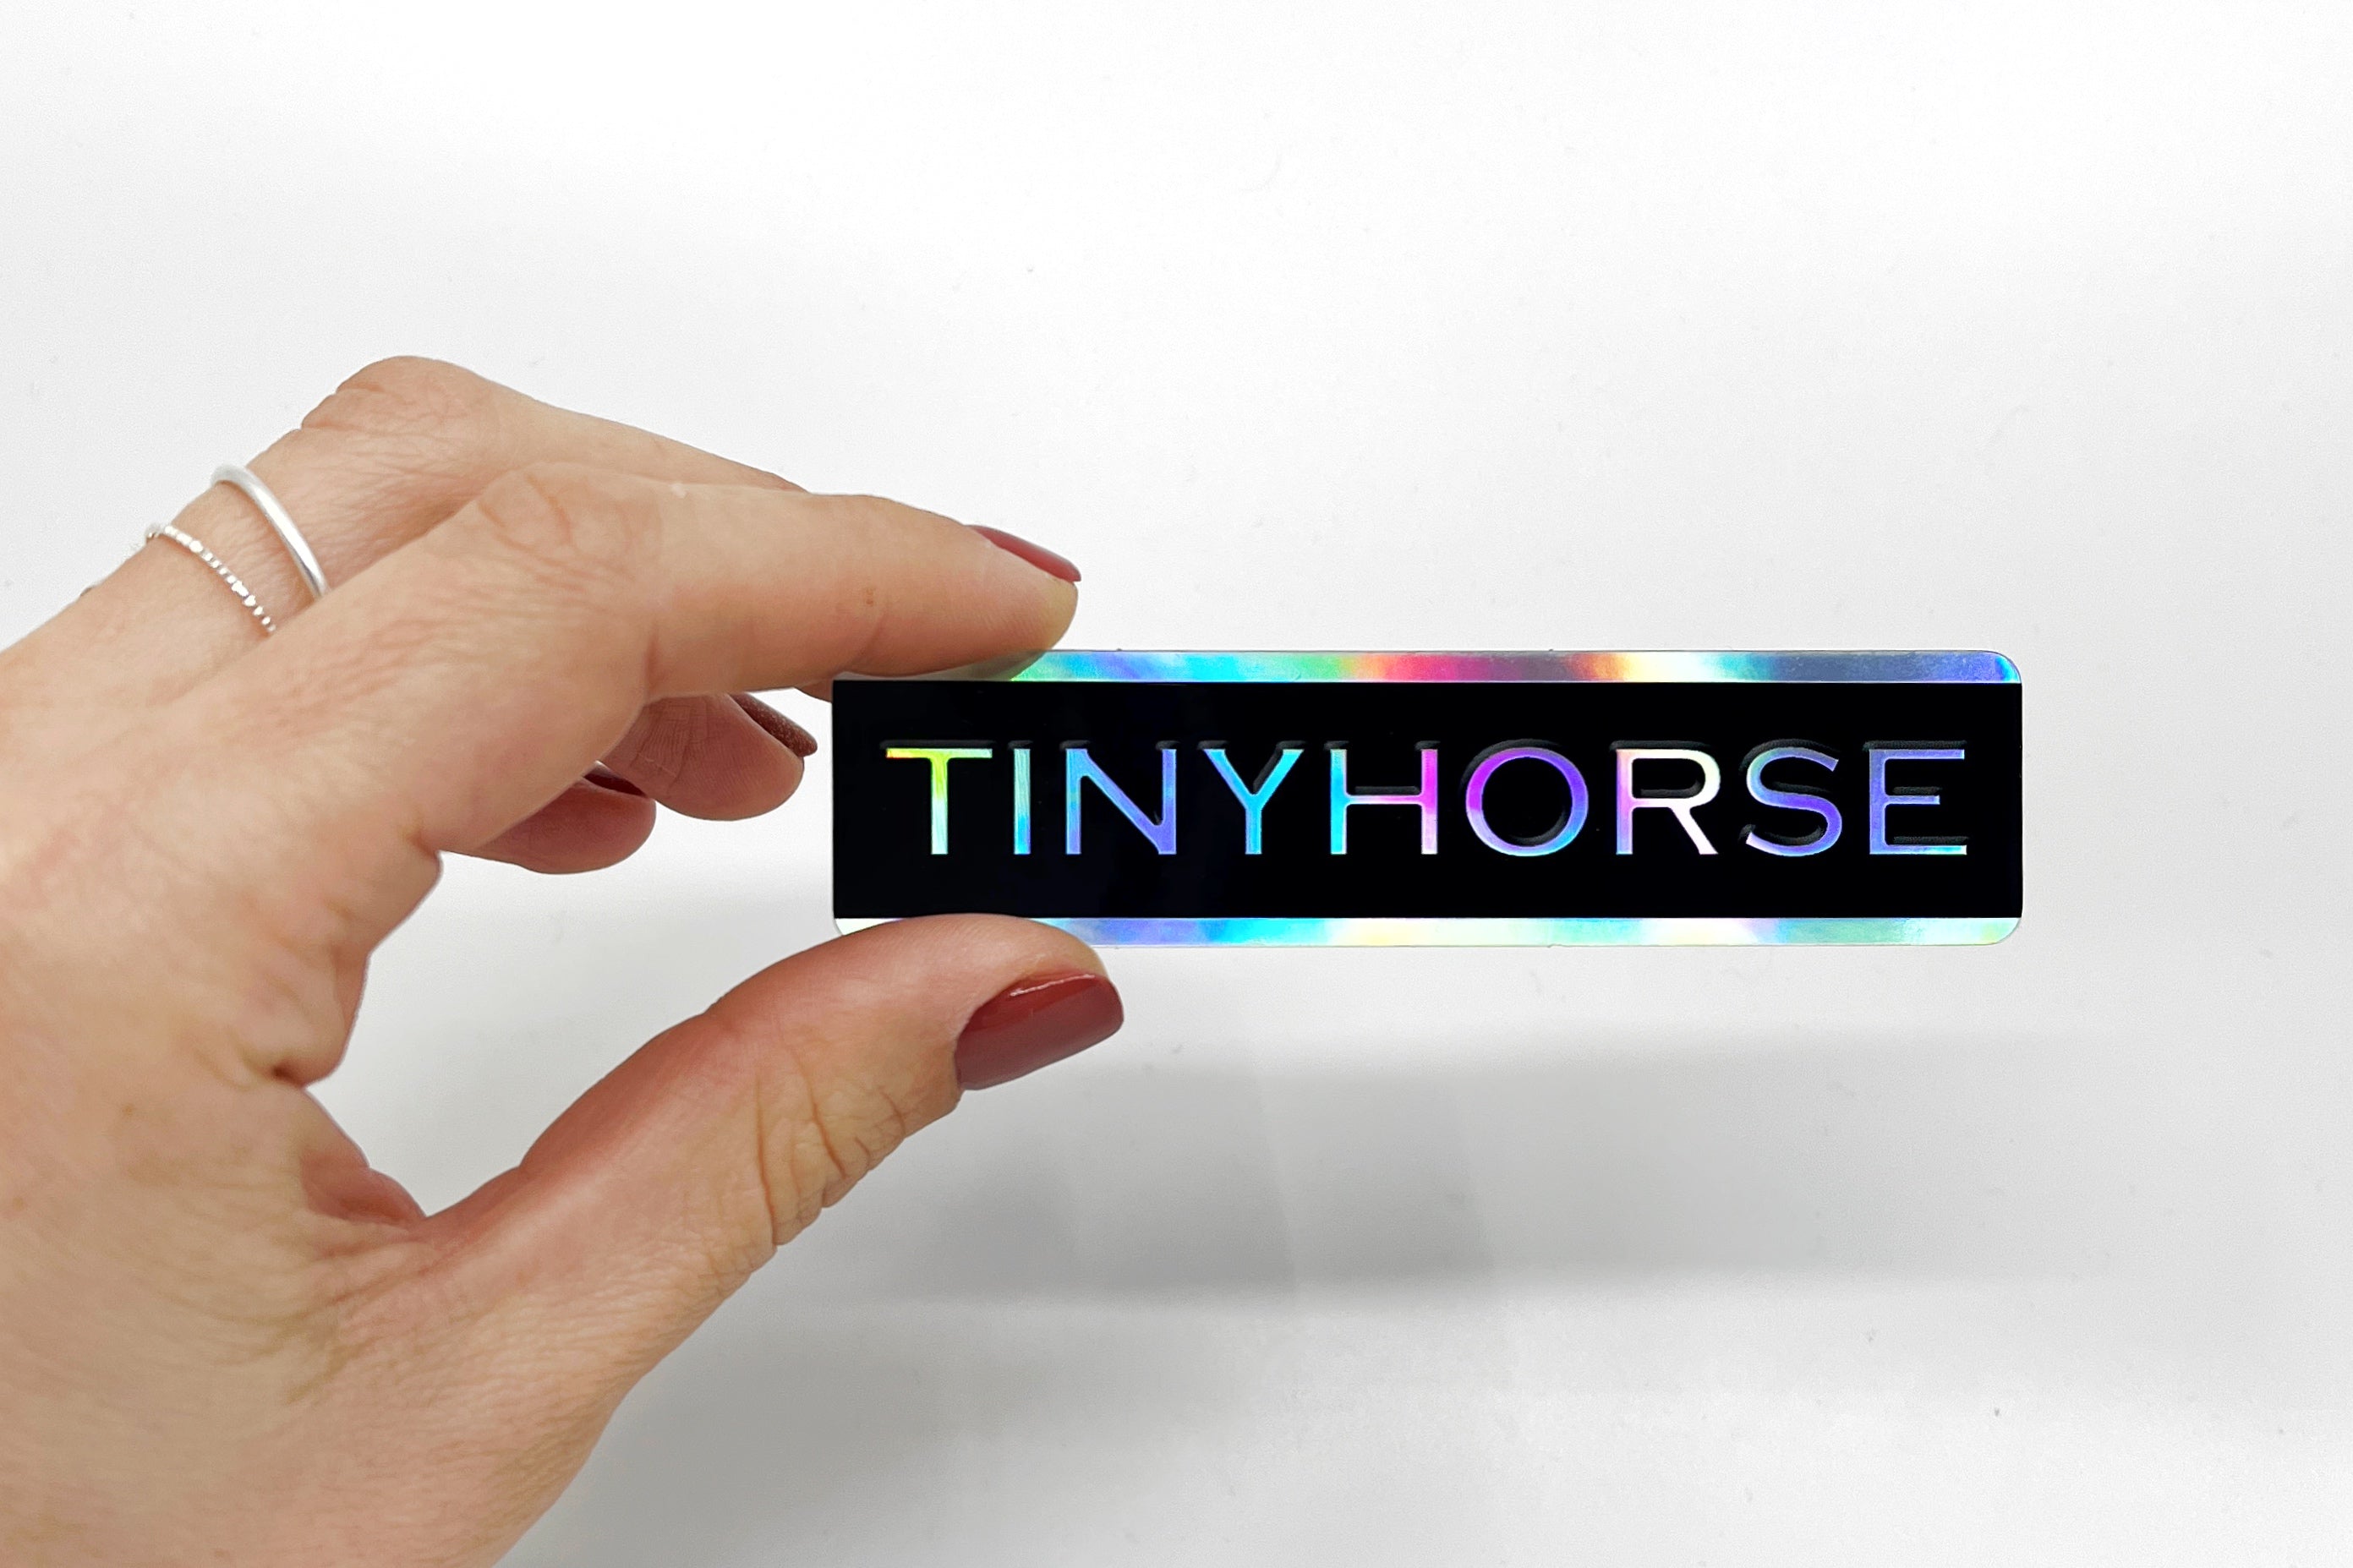 Hand holds a colourful sticker that says “TinyHorse”